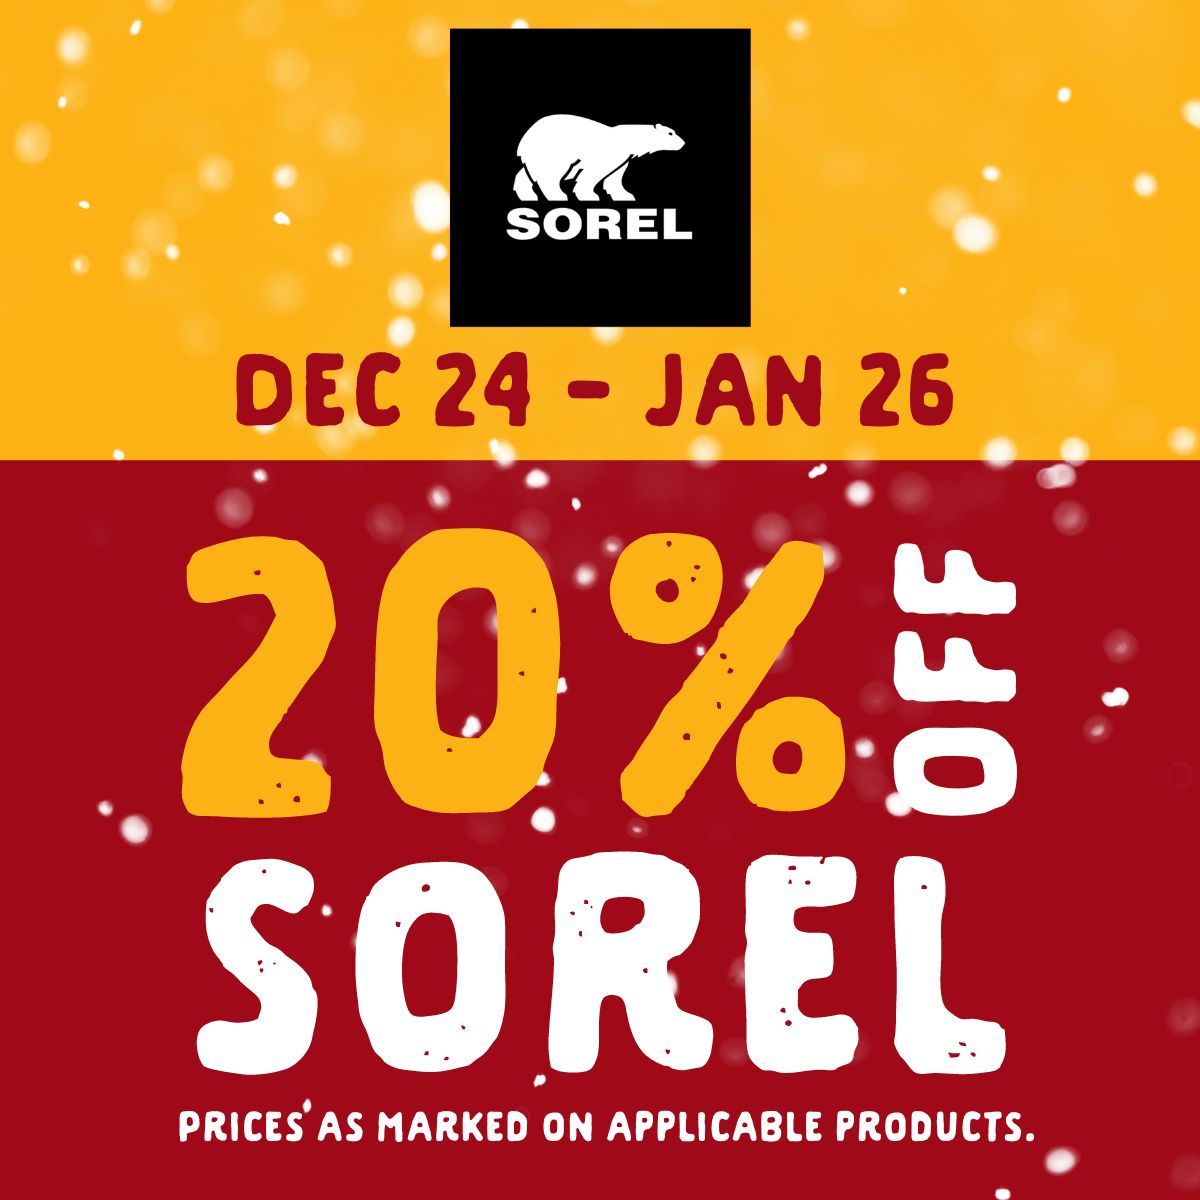 20% off Sorel from December 24 until January 26. Prices as marked on applicable products.